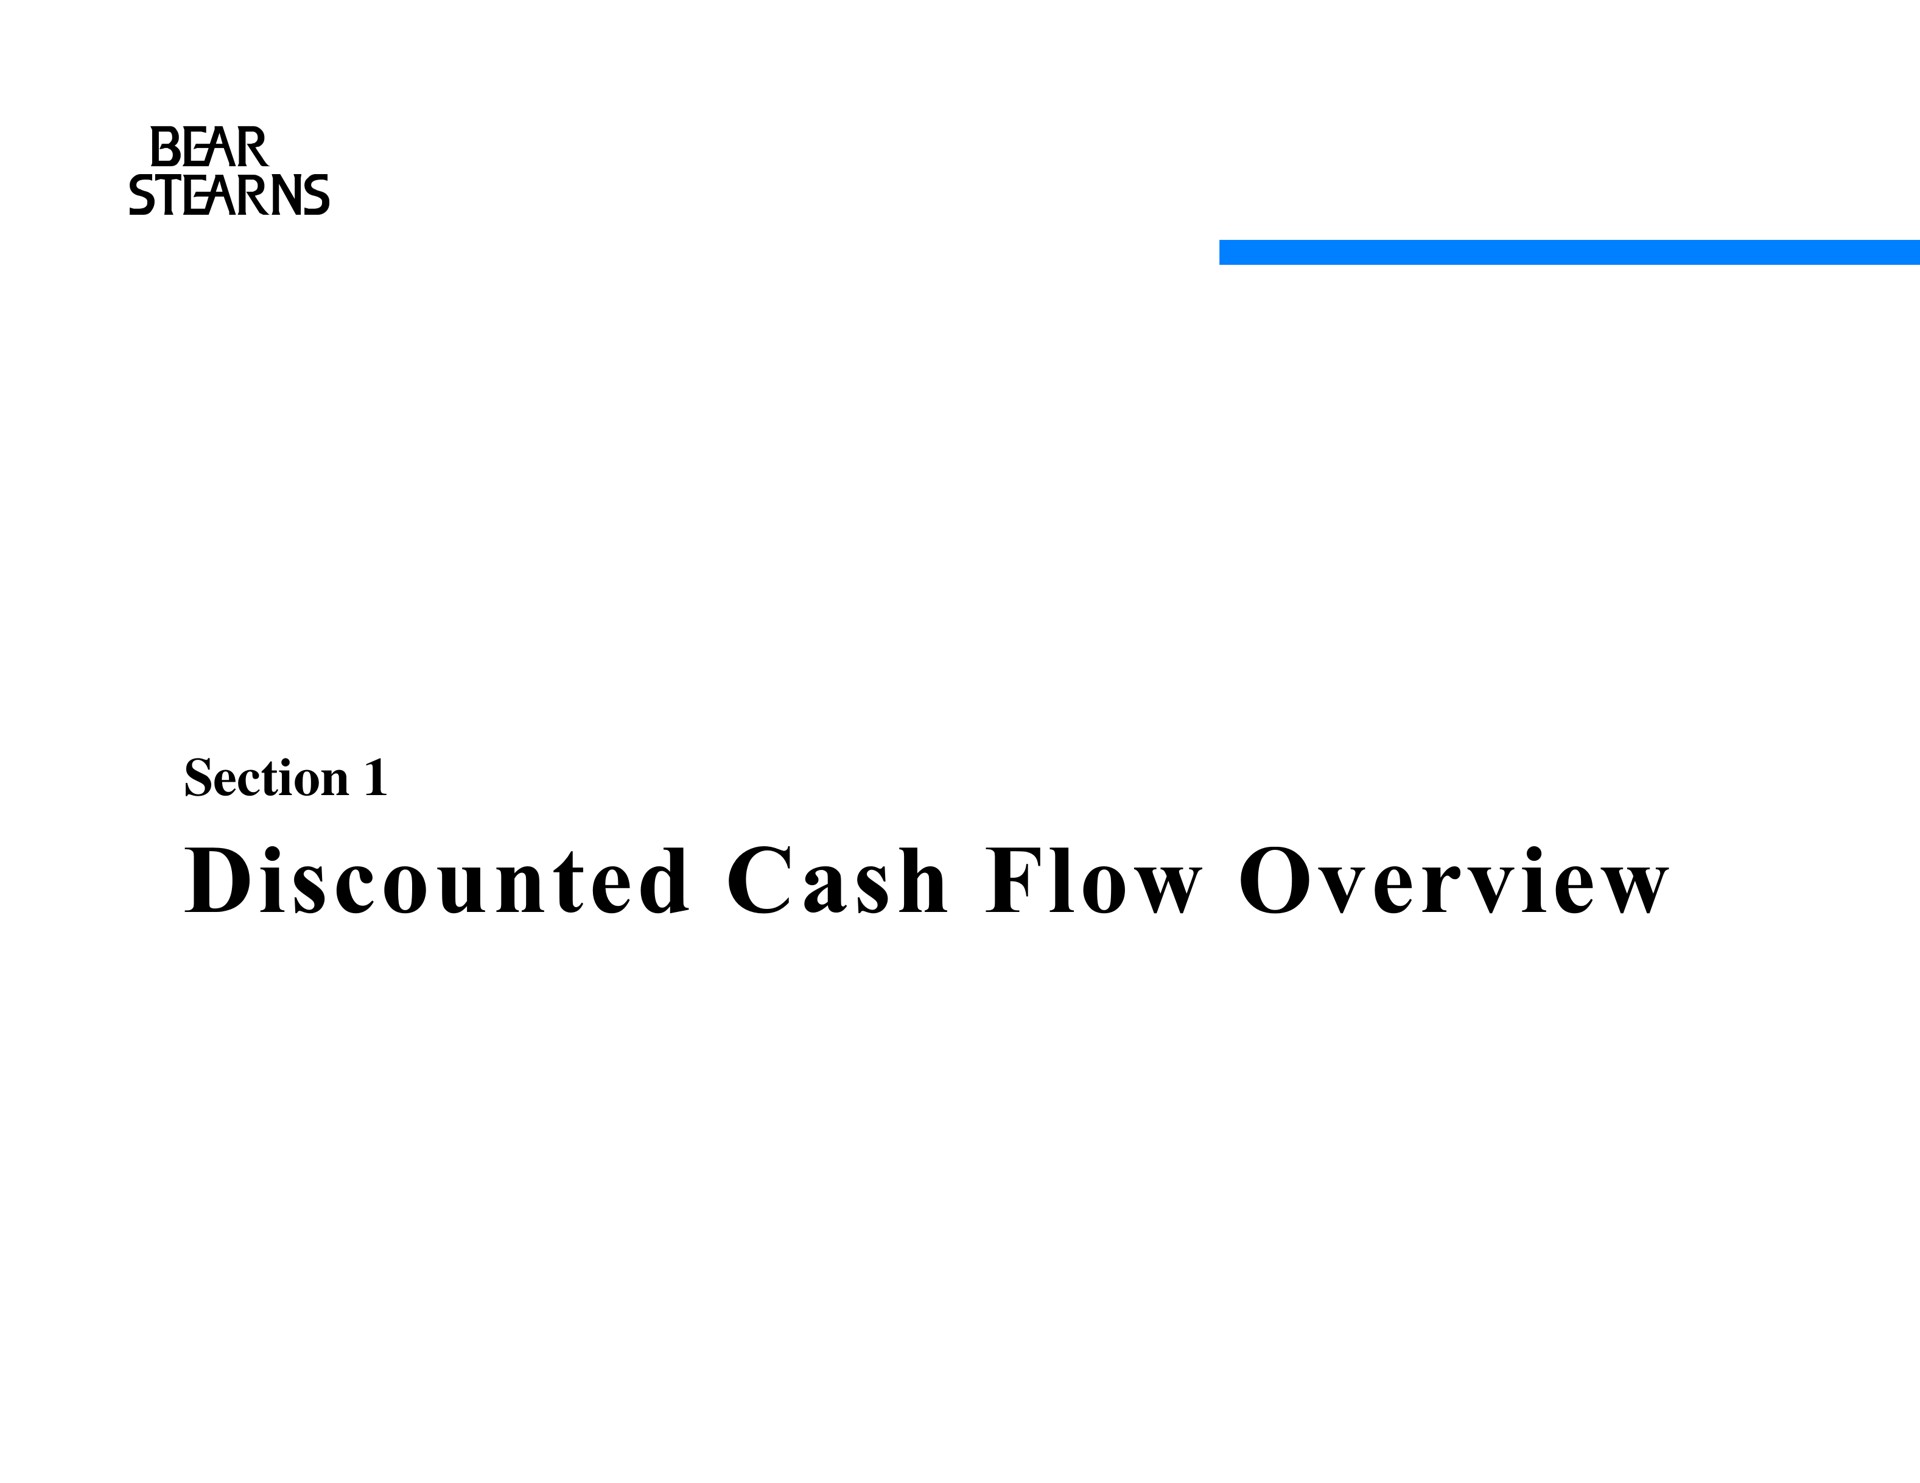 section discounted cash flow overview | Bear Stearns